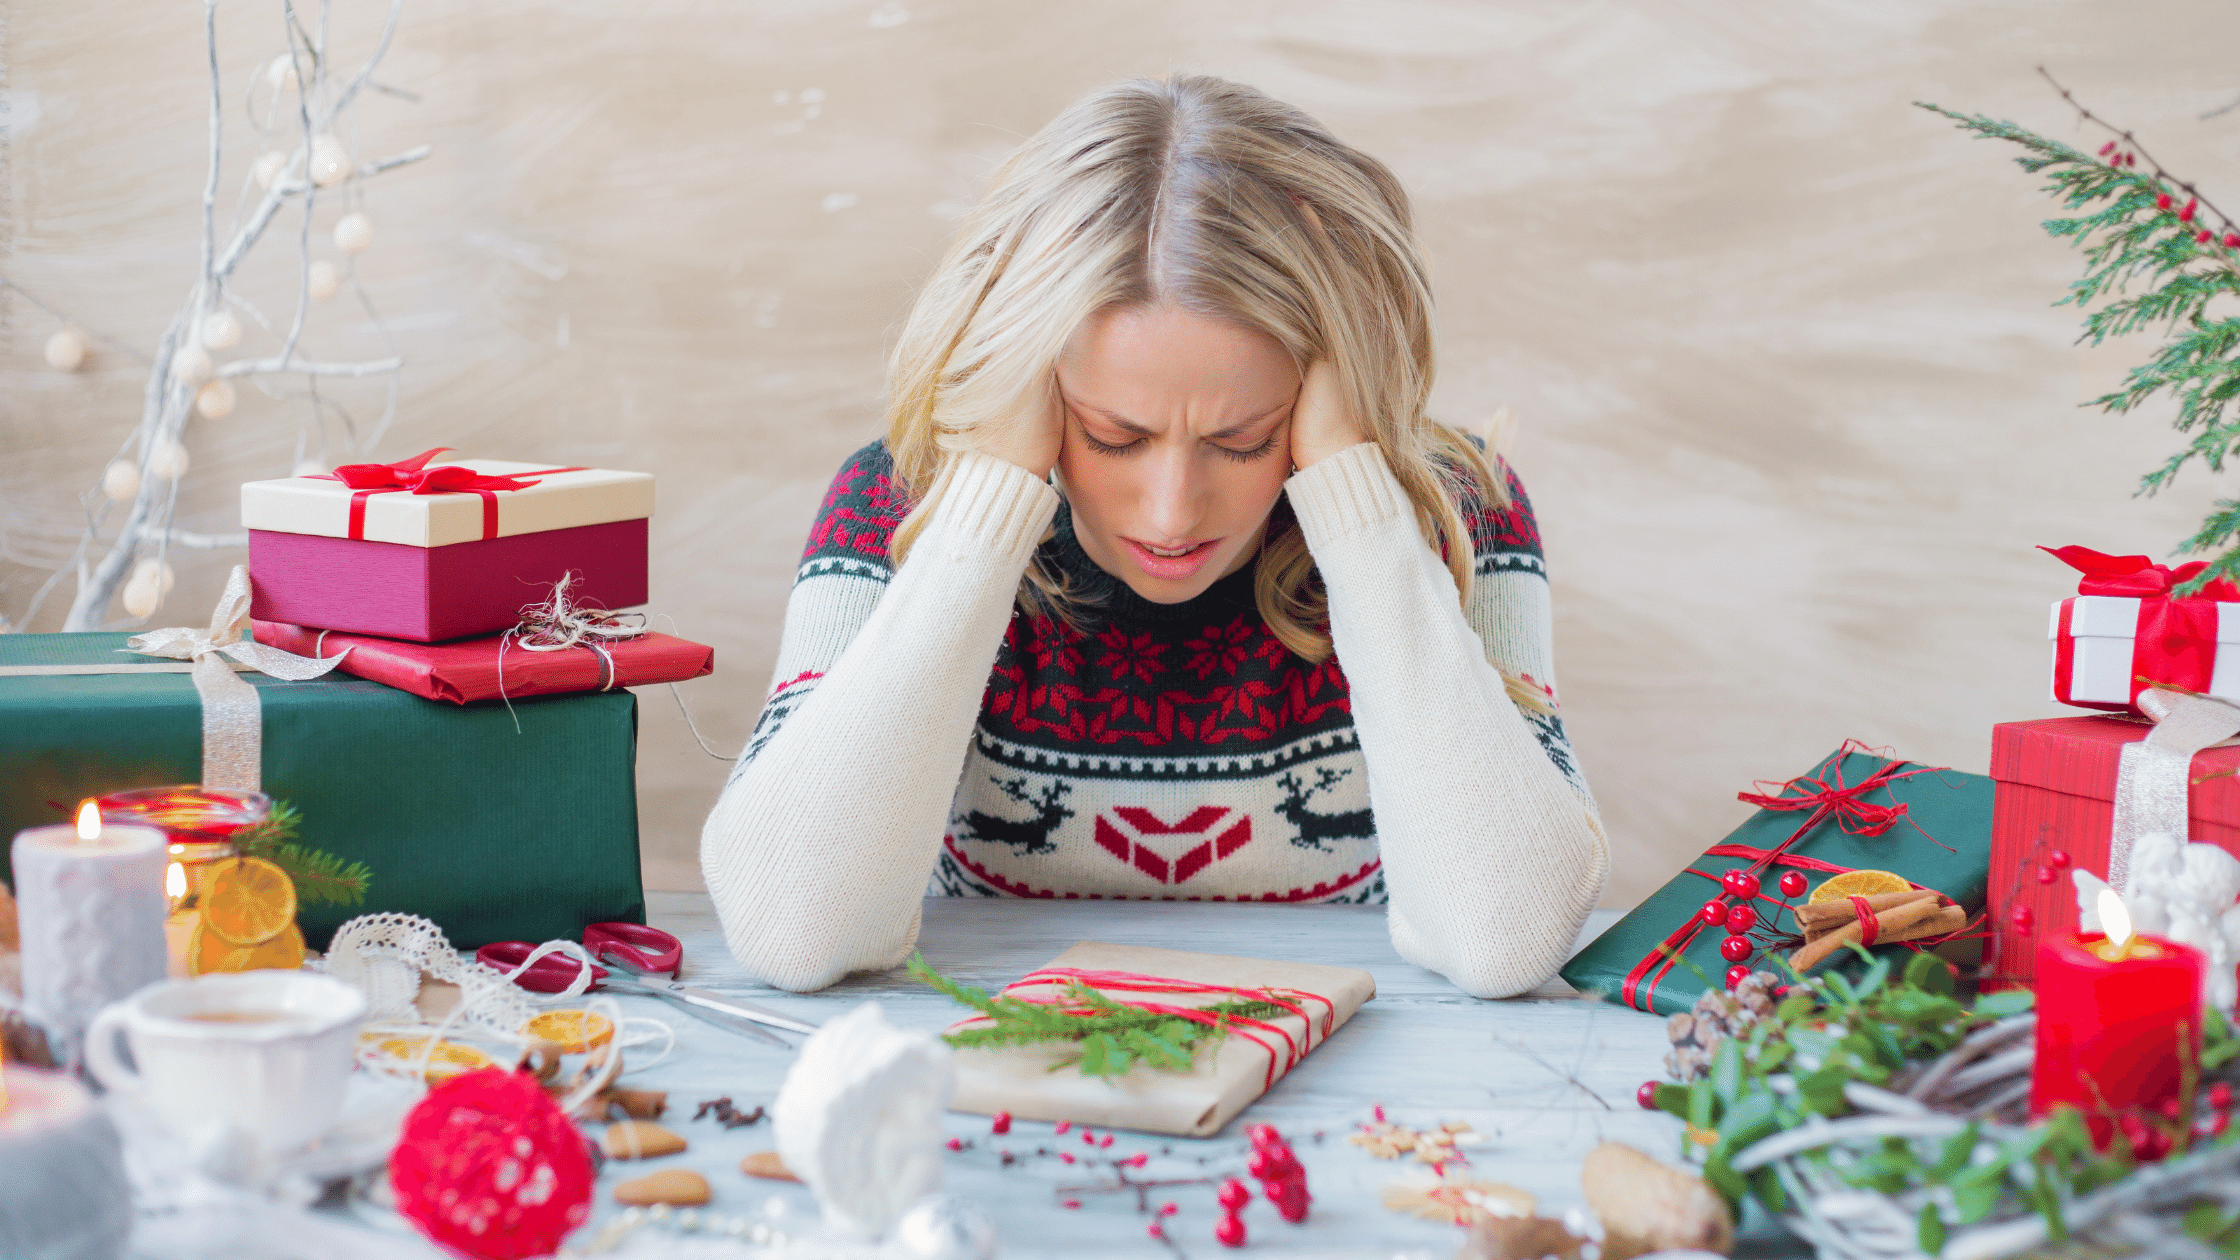 8 Tips to Cope with Loss During the Holiday Season